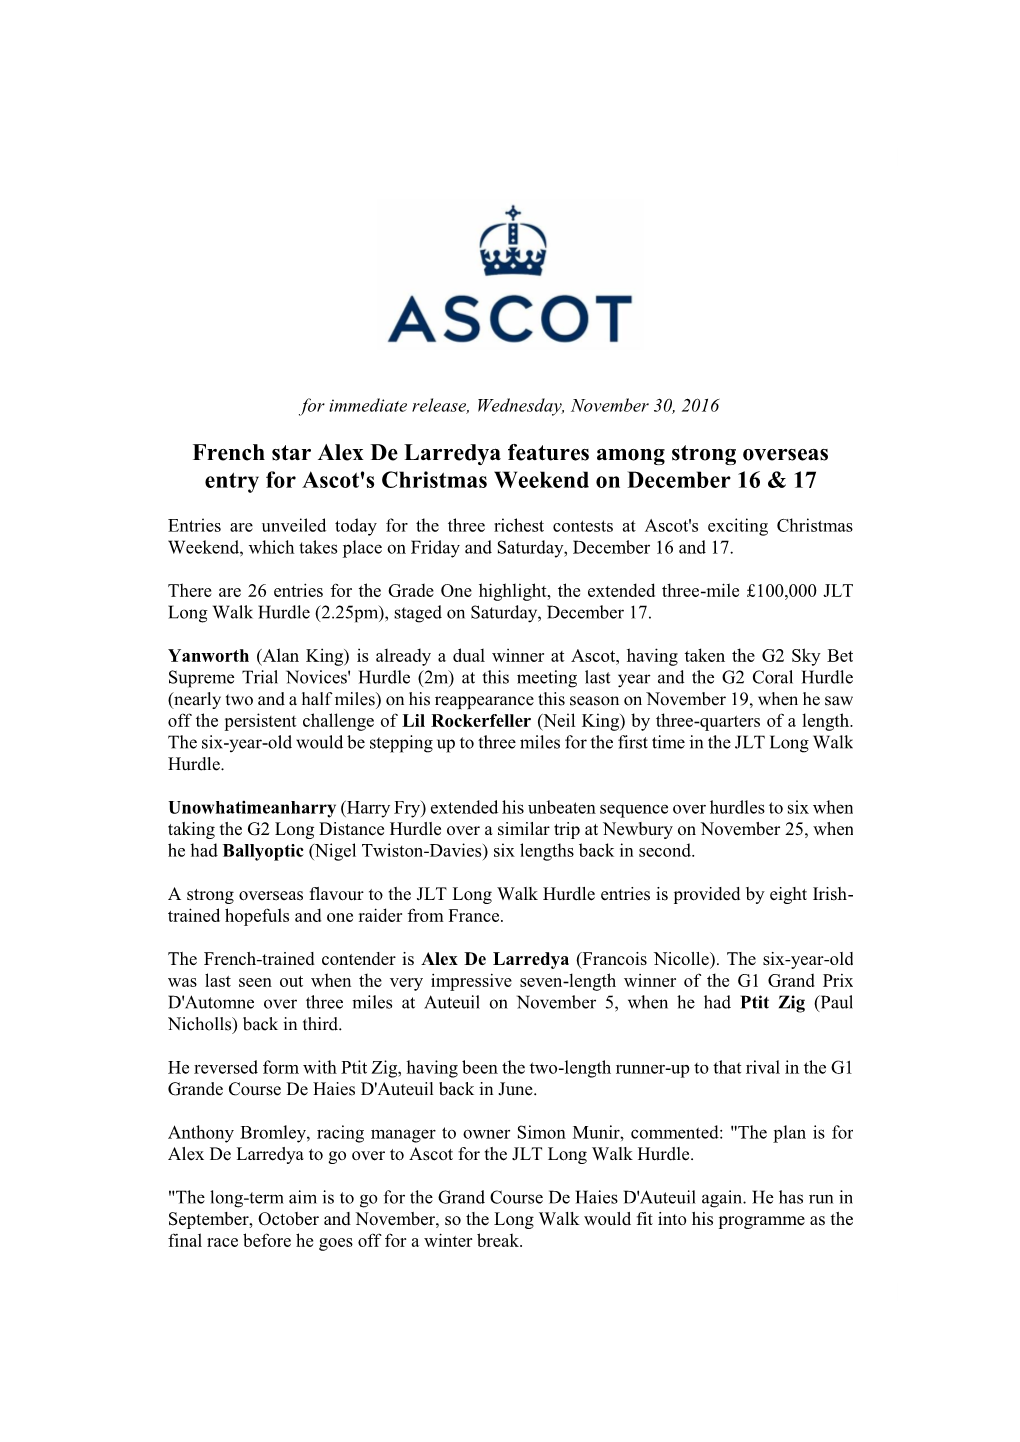 French Star Alex De Larredya Features Among Strong Overseas Entry for Ascot's Christmas Weekend on December 16 & 17